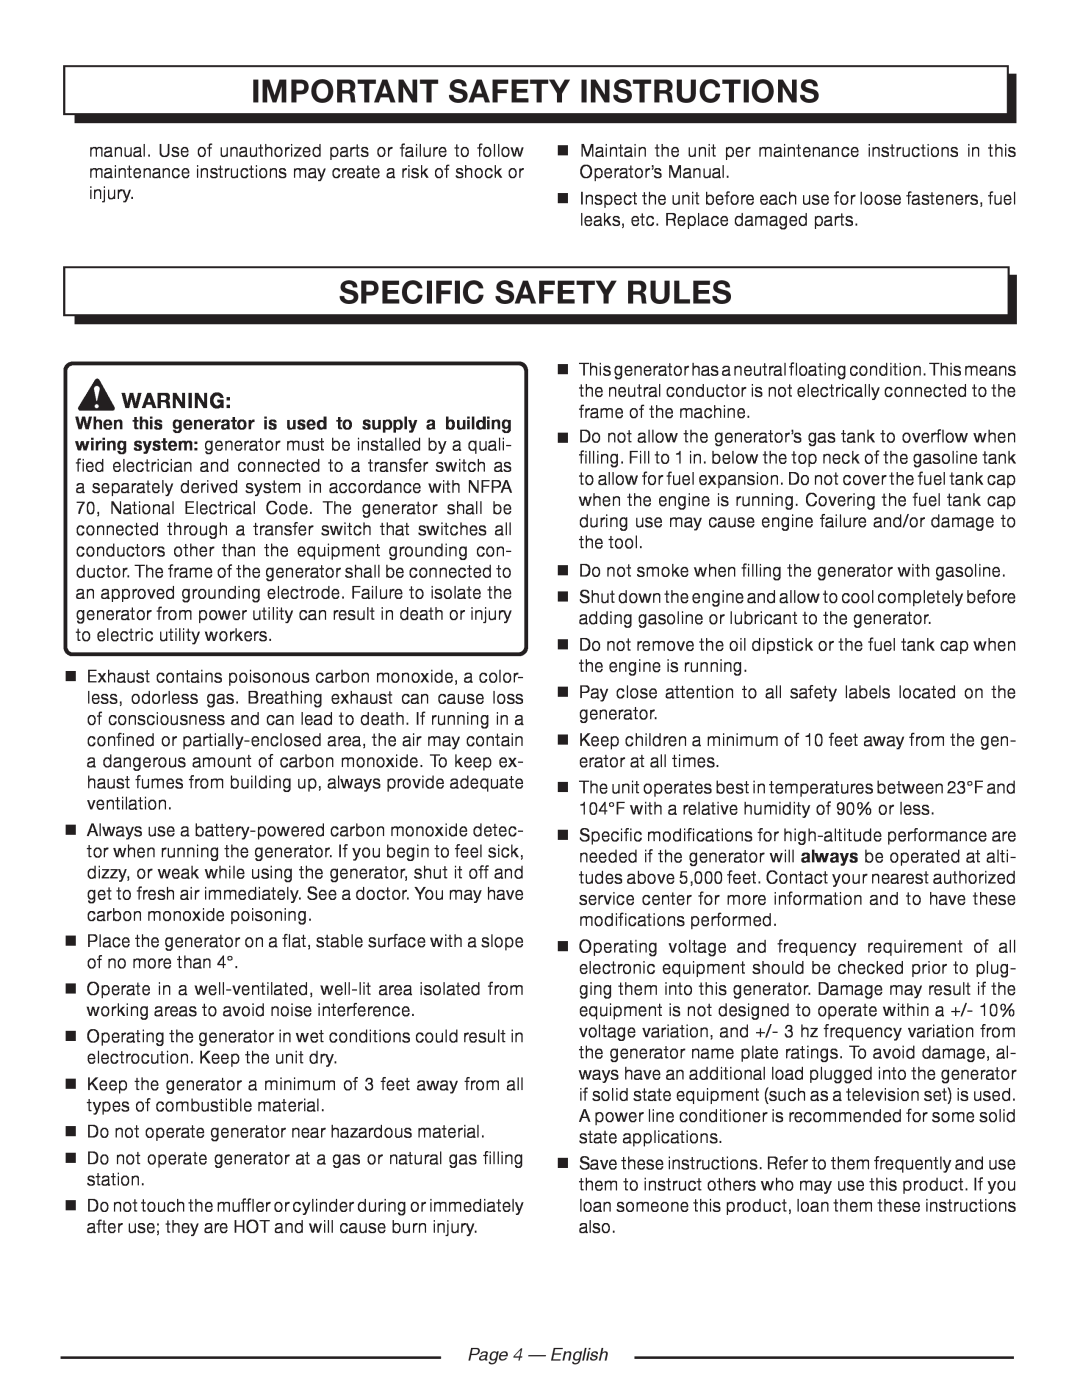 Homelite HGCA1400 manuel dutilisation Specific Safety Rules, important safety instructions, Page 4 - English 